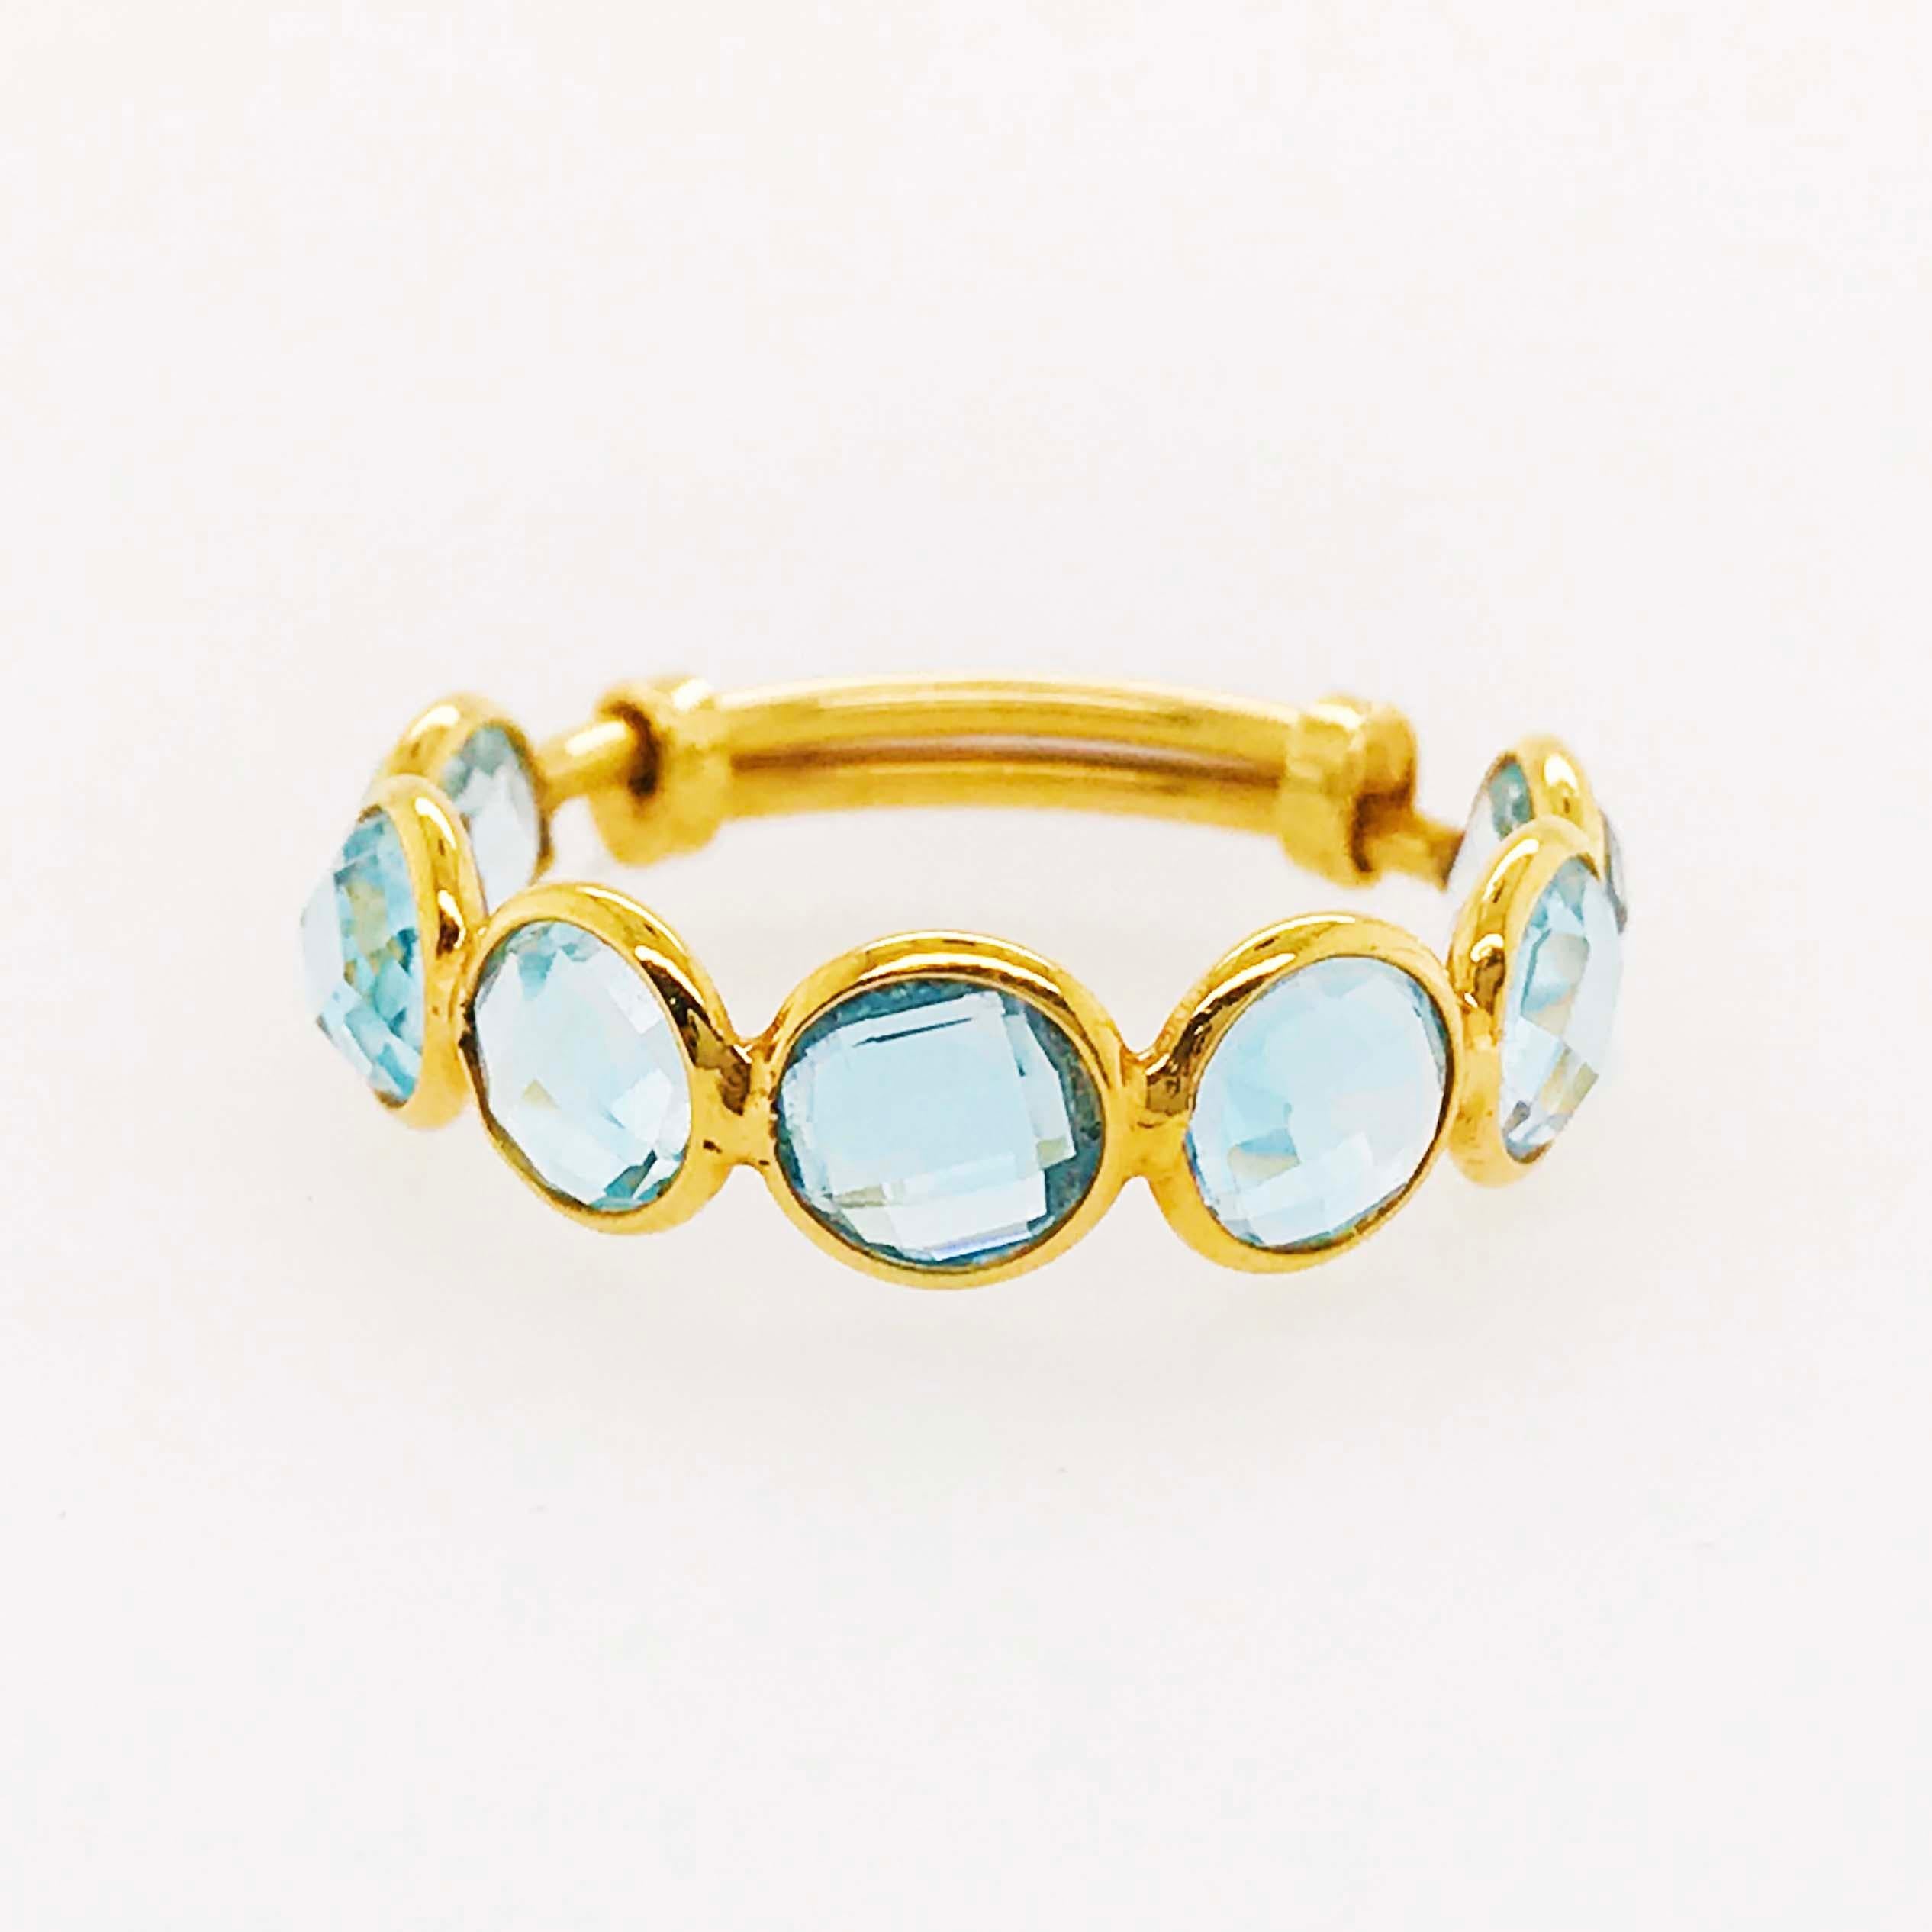 This unique, fun blue topaz ring is creative and innovative! With an adjustable band design this ring can fit almost any finger for different looks and jewelry pairing designs! The adjustable ring has genuine, nature blue topaz gemstones that have